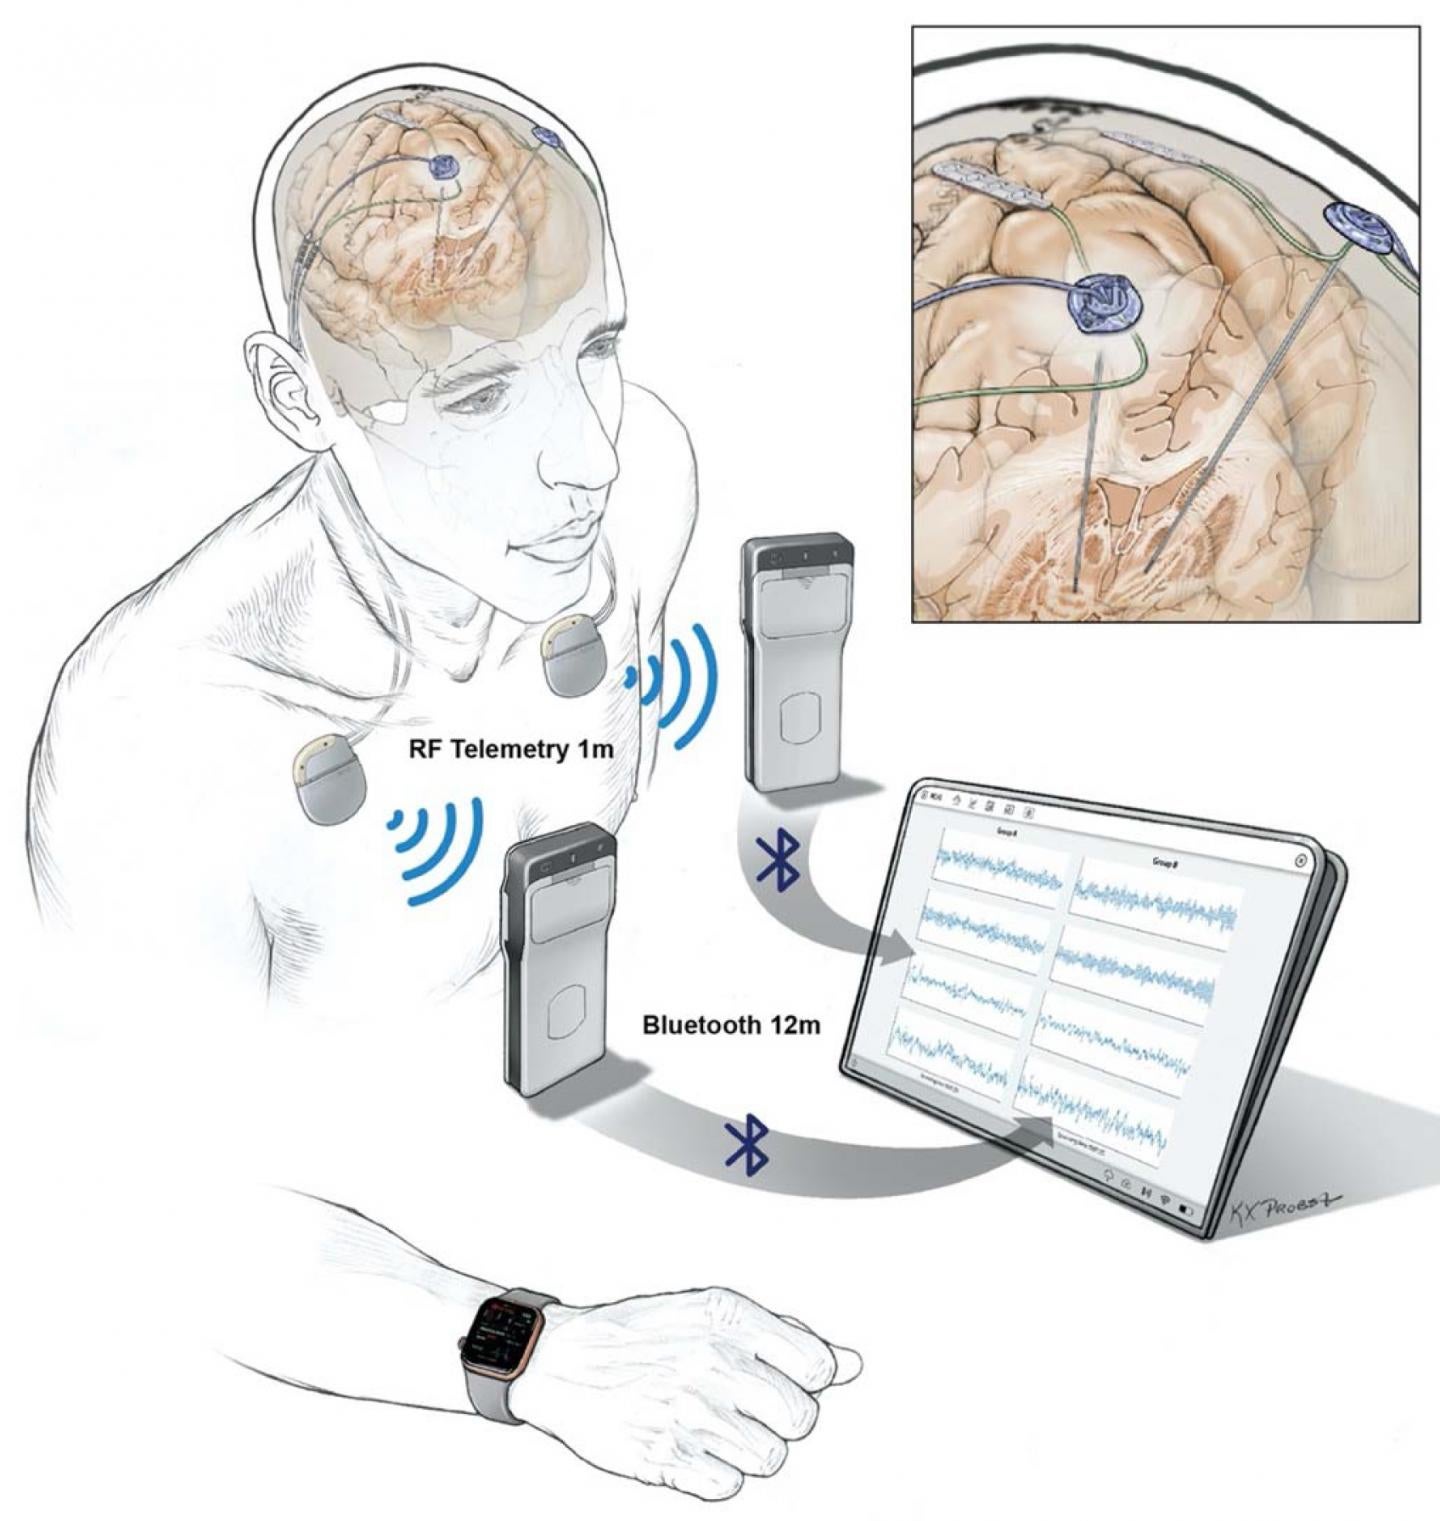 Implanted electrodes stream recorded data to a pocket-sized device worn by a patient. The data is then wirelessly transferred to a tablet and uploaded to the cloud via a HIPAA-compliant server. (Illustration: Starr lab/UCSF)